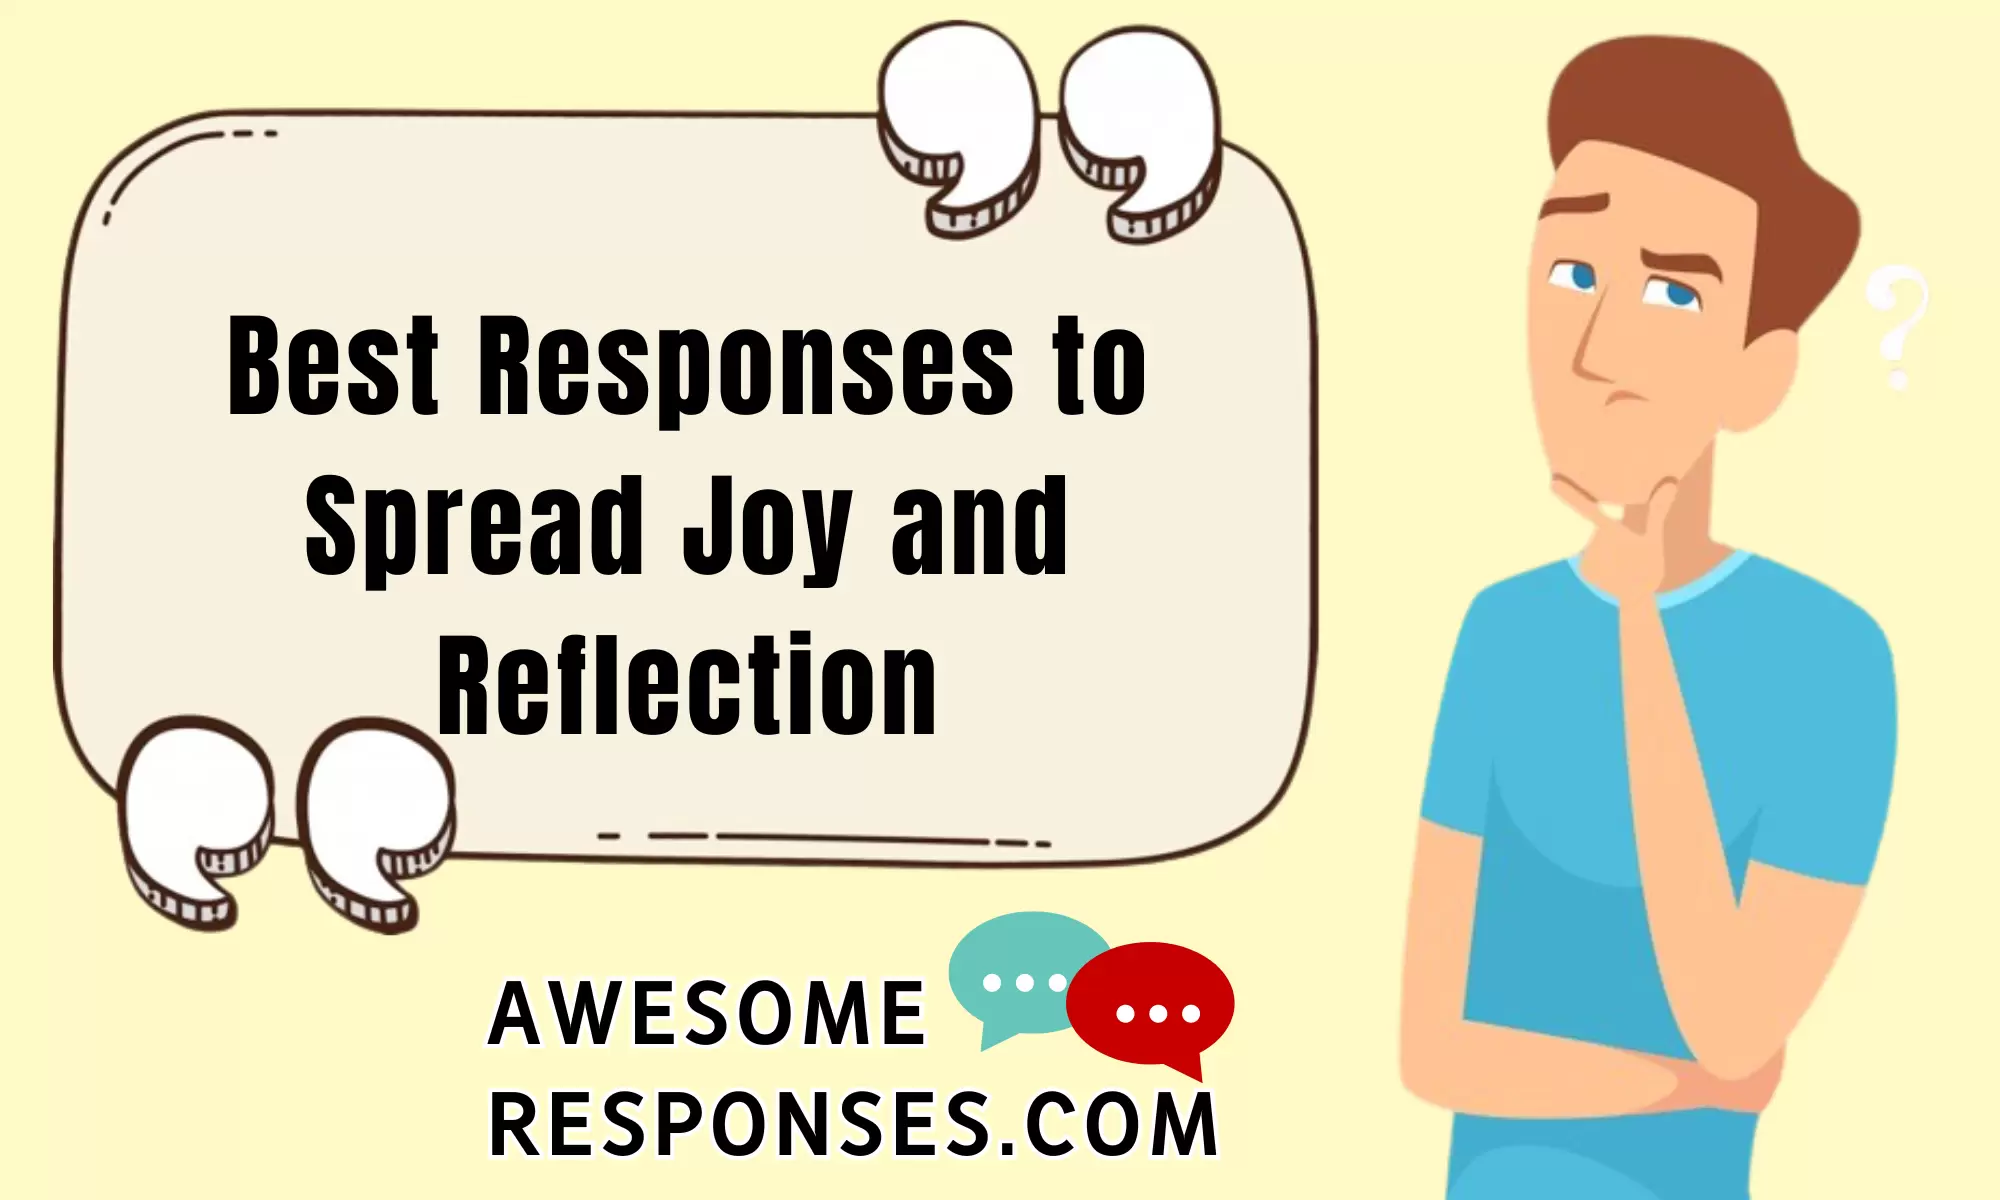 Best Responses to Spread Joy and Reflection